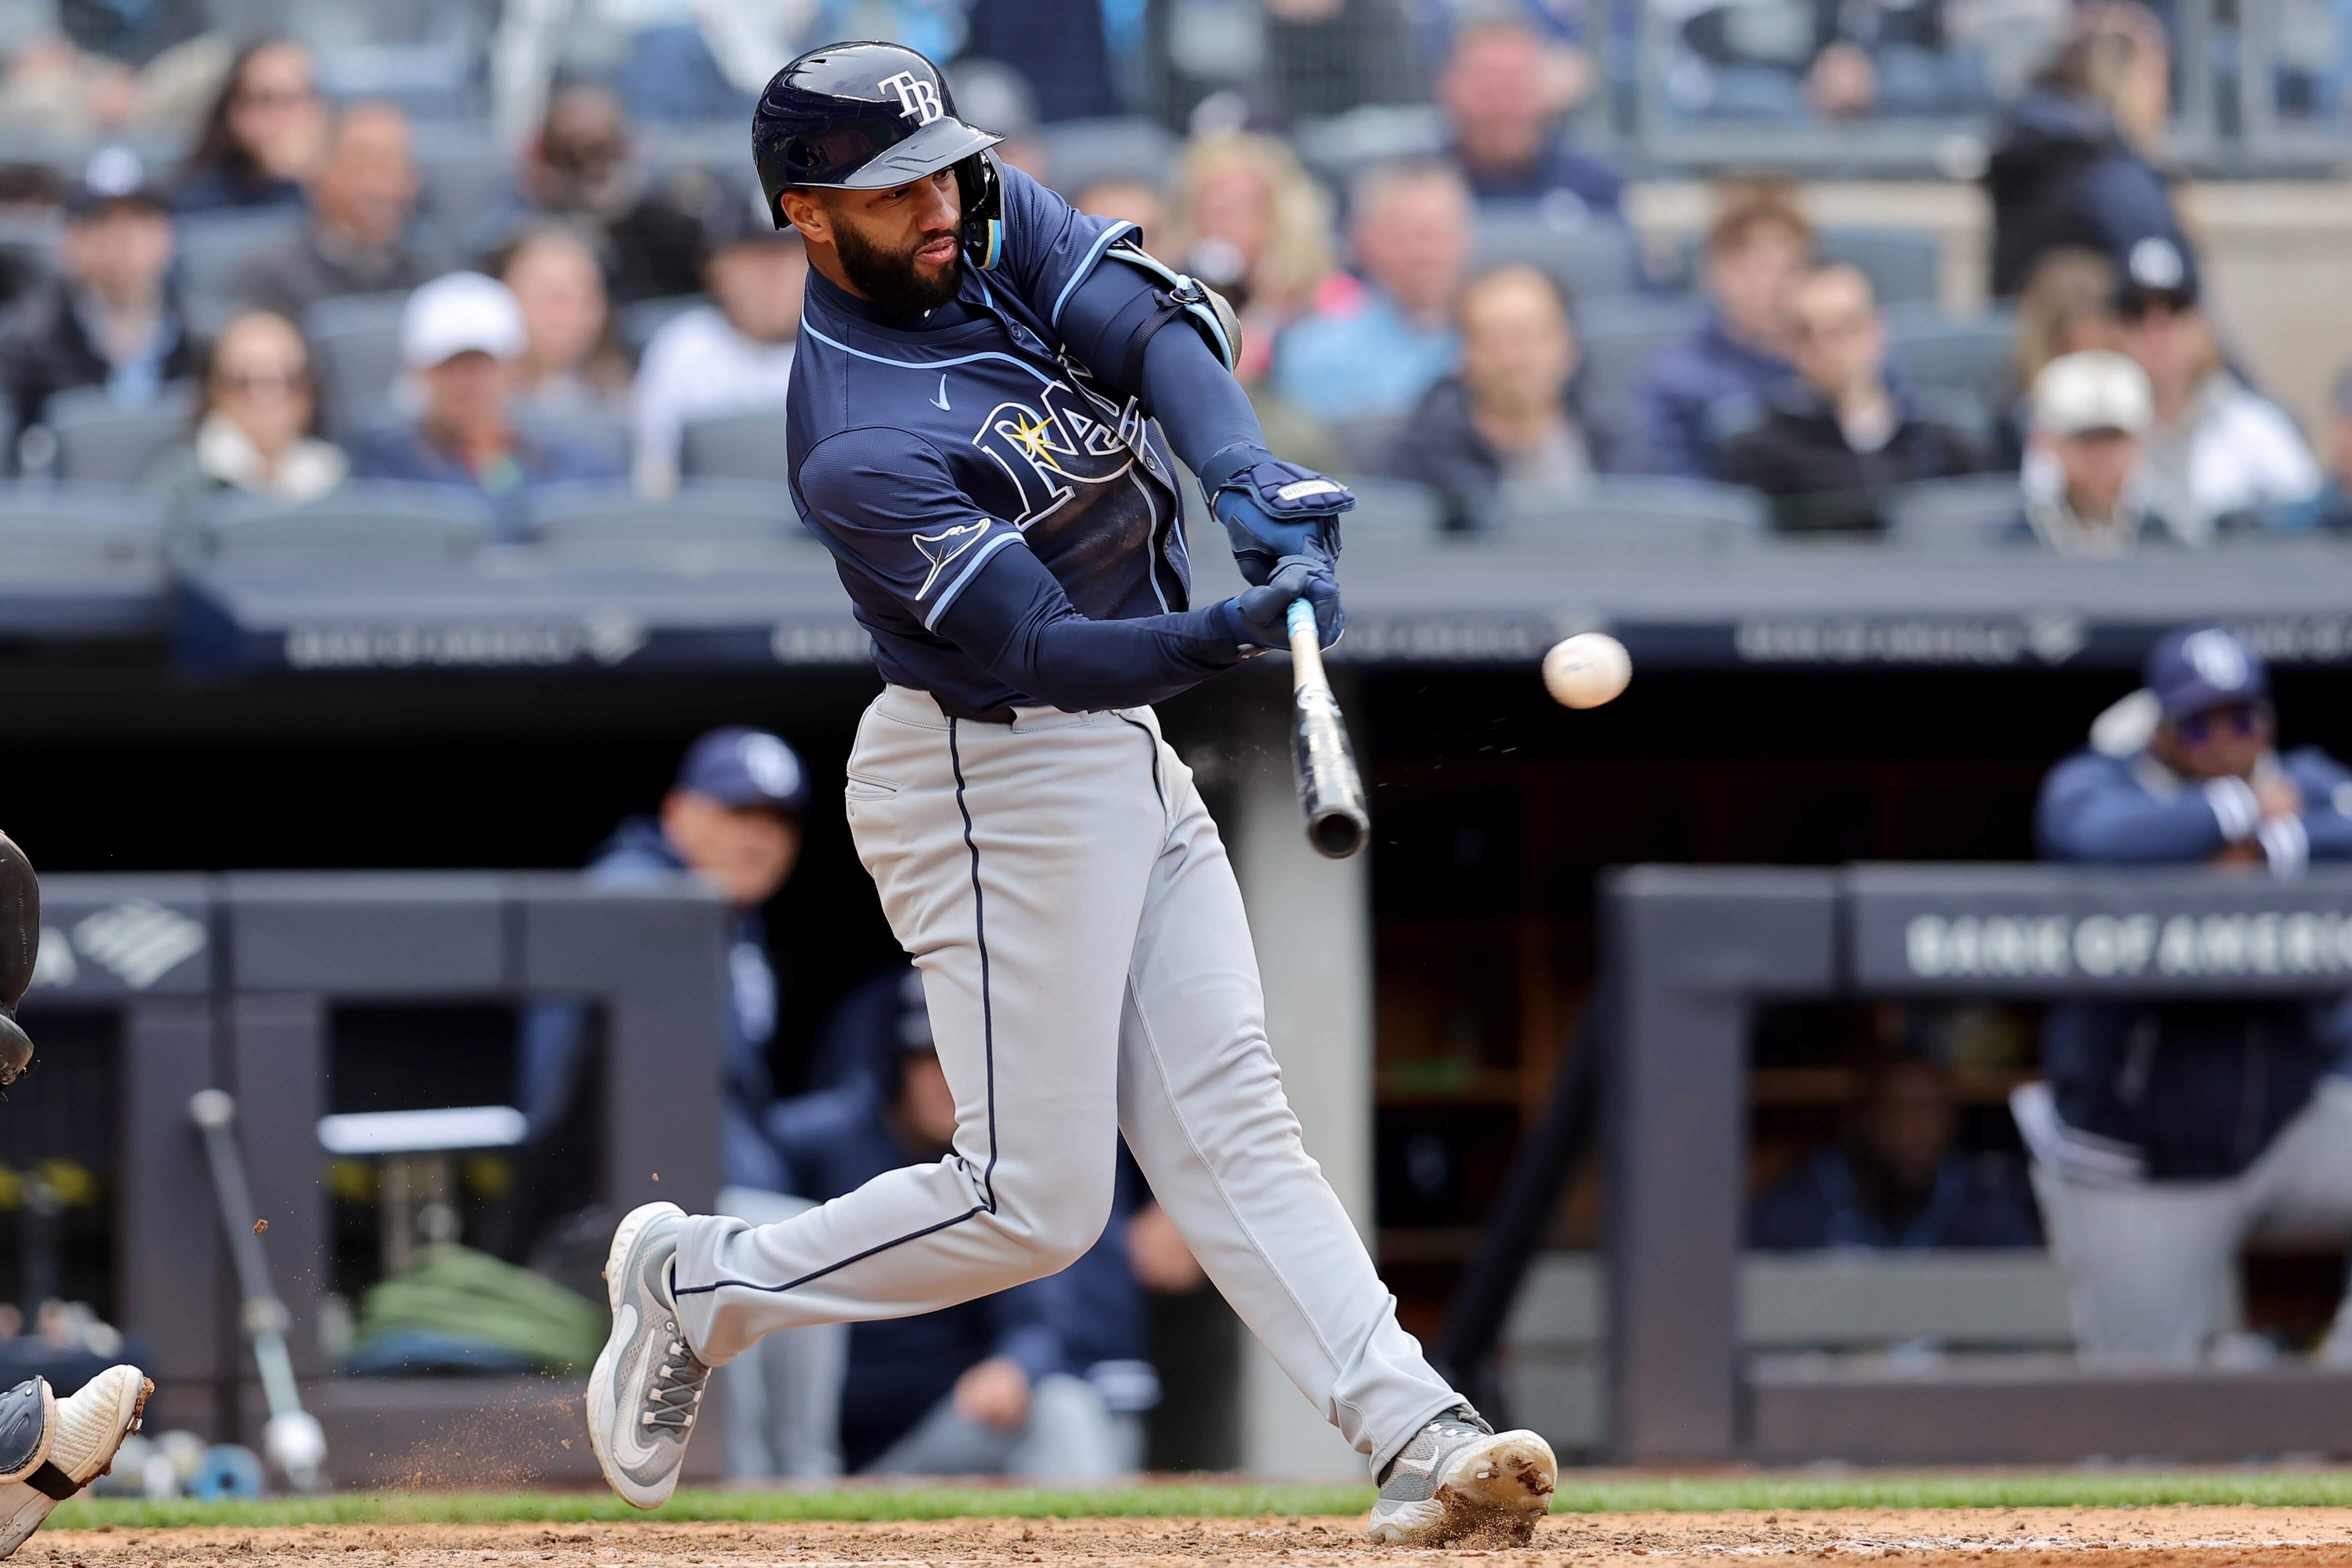 How To Bet - Today’s MLB Prop Picks and Best Bets: Rosario Starts New Hitting Streak vs Tigers